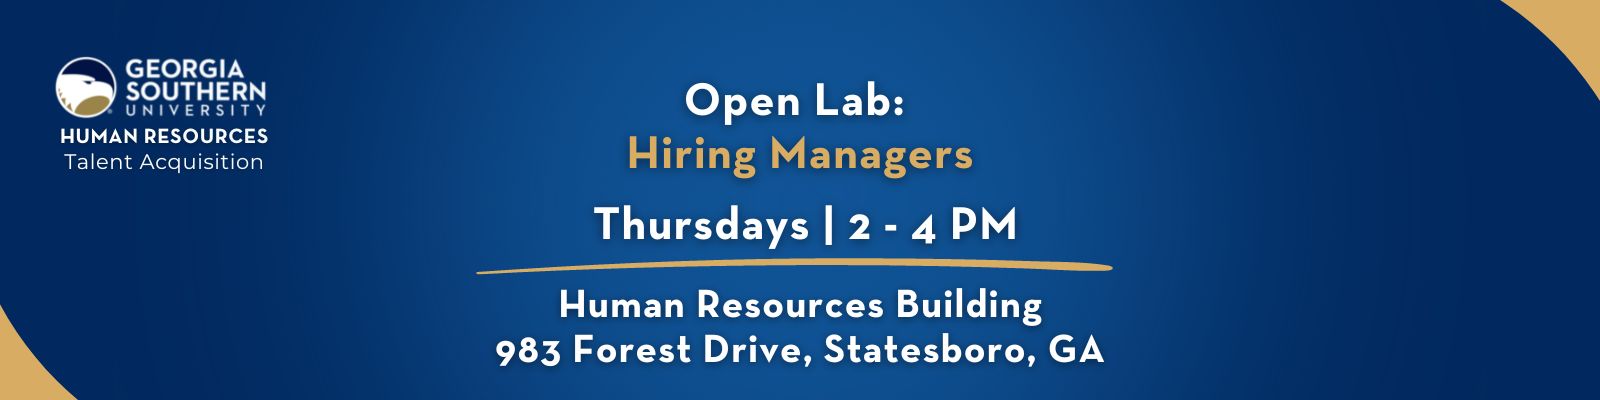 Open Lab for hiring managers
Thursdays 2pm to 4pm
In the human resources building
983 Forest Drive
Statesboro, Georgia